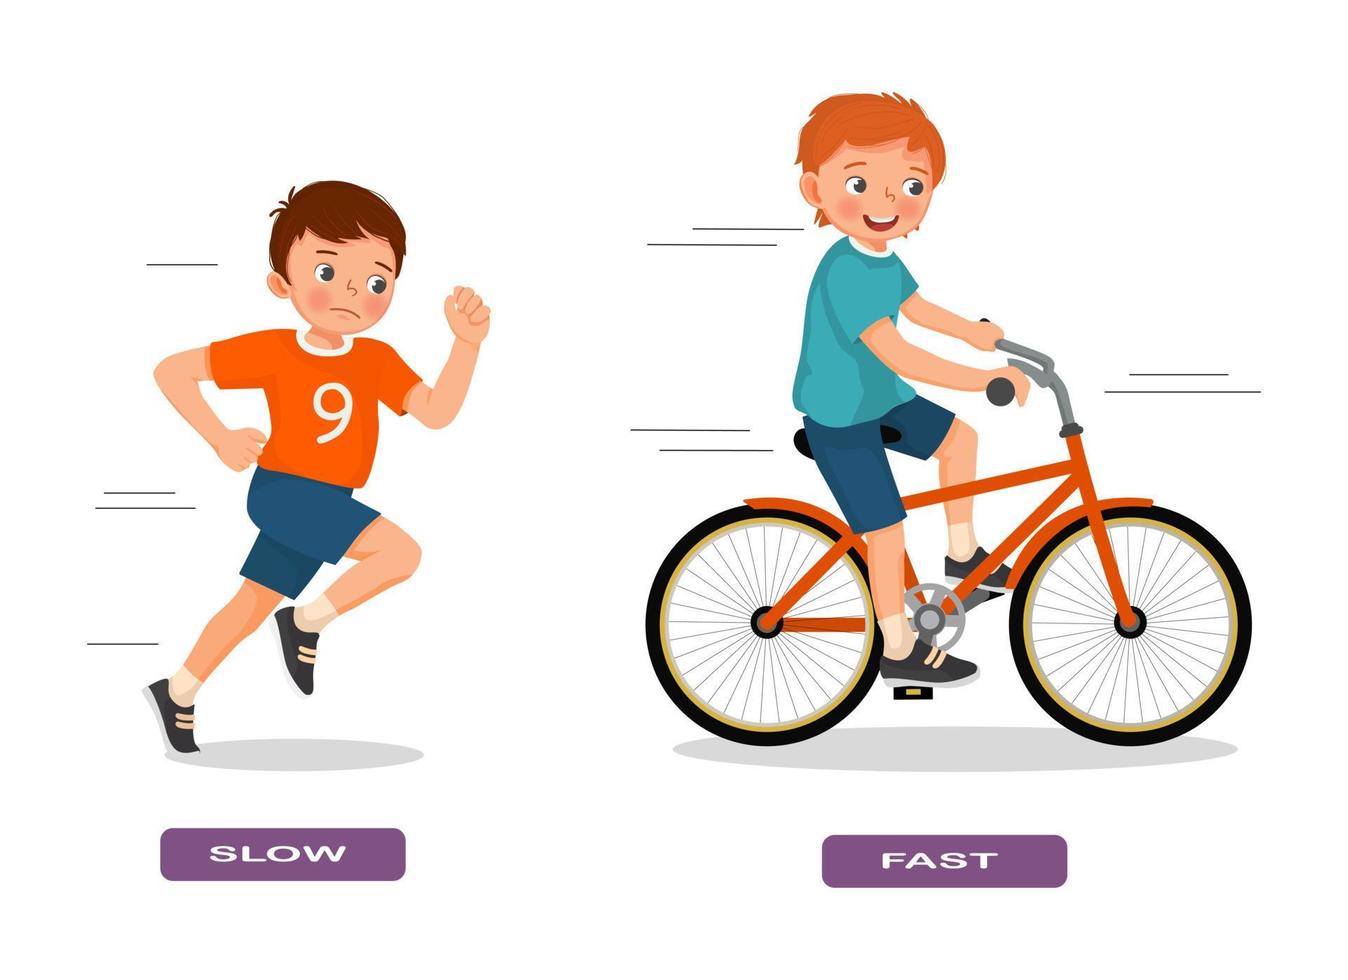 Opposite adjective antonym words slow and fast illustration of little boy running and riding bicycle explanation flashcard with text label vector